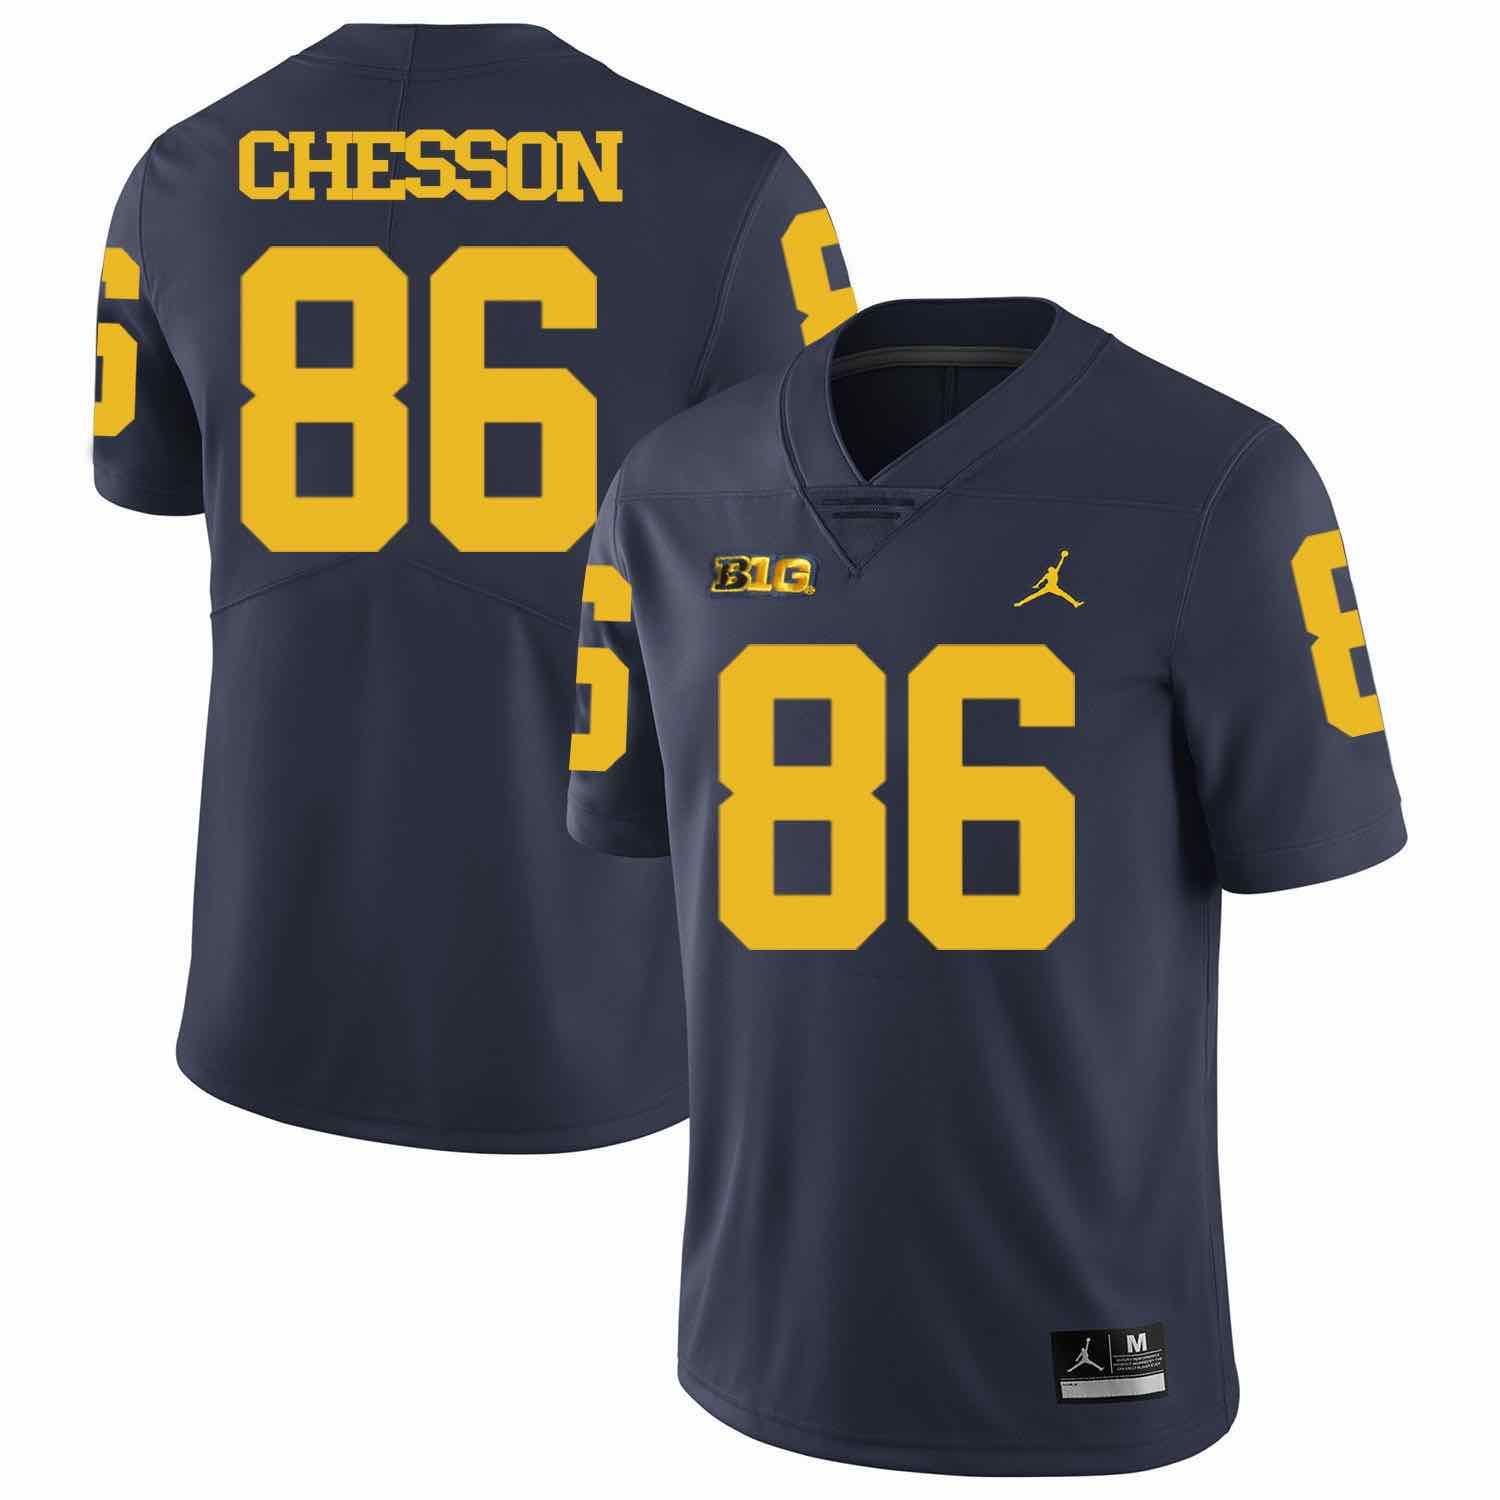 NCAA Michigan Wolverines #86 Chesson D.Blue Football Jersey